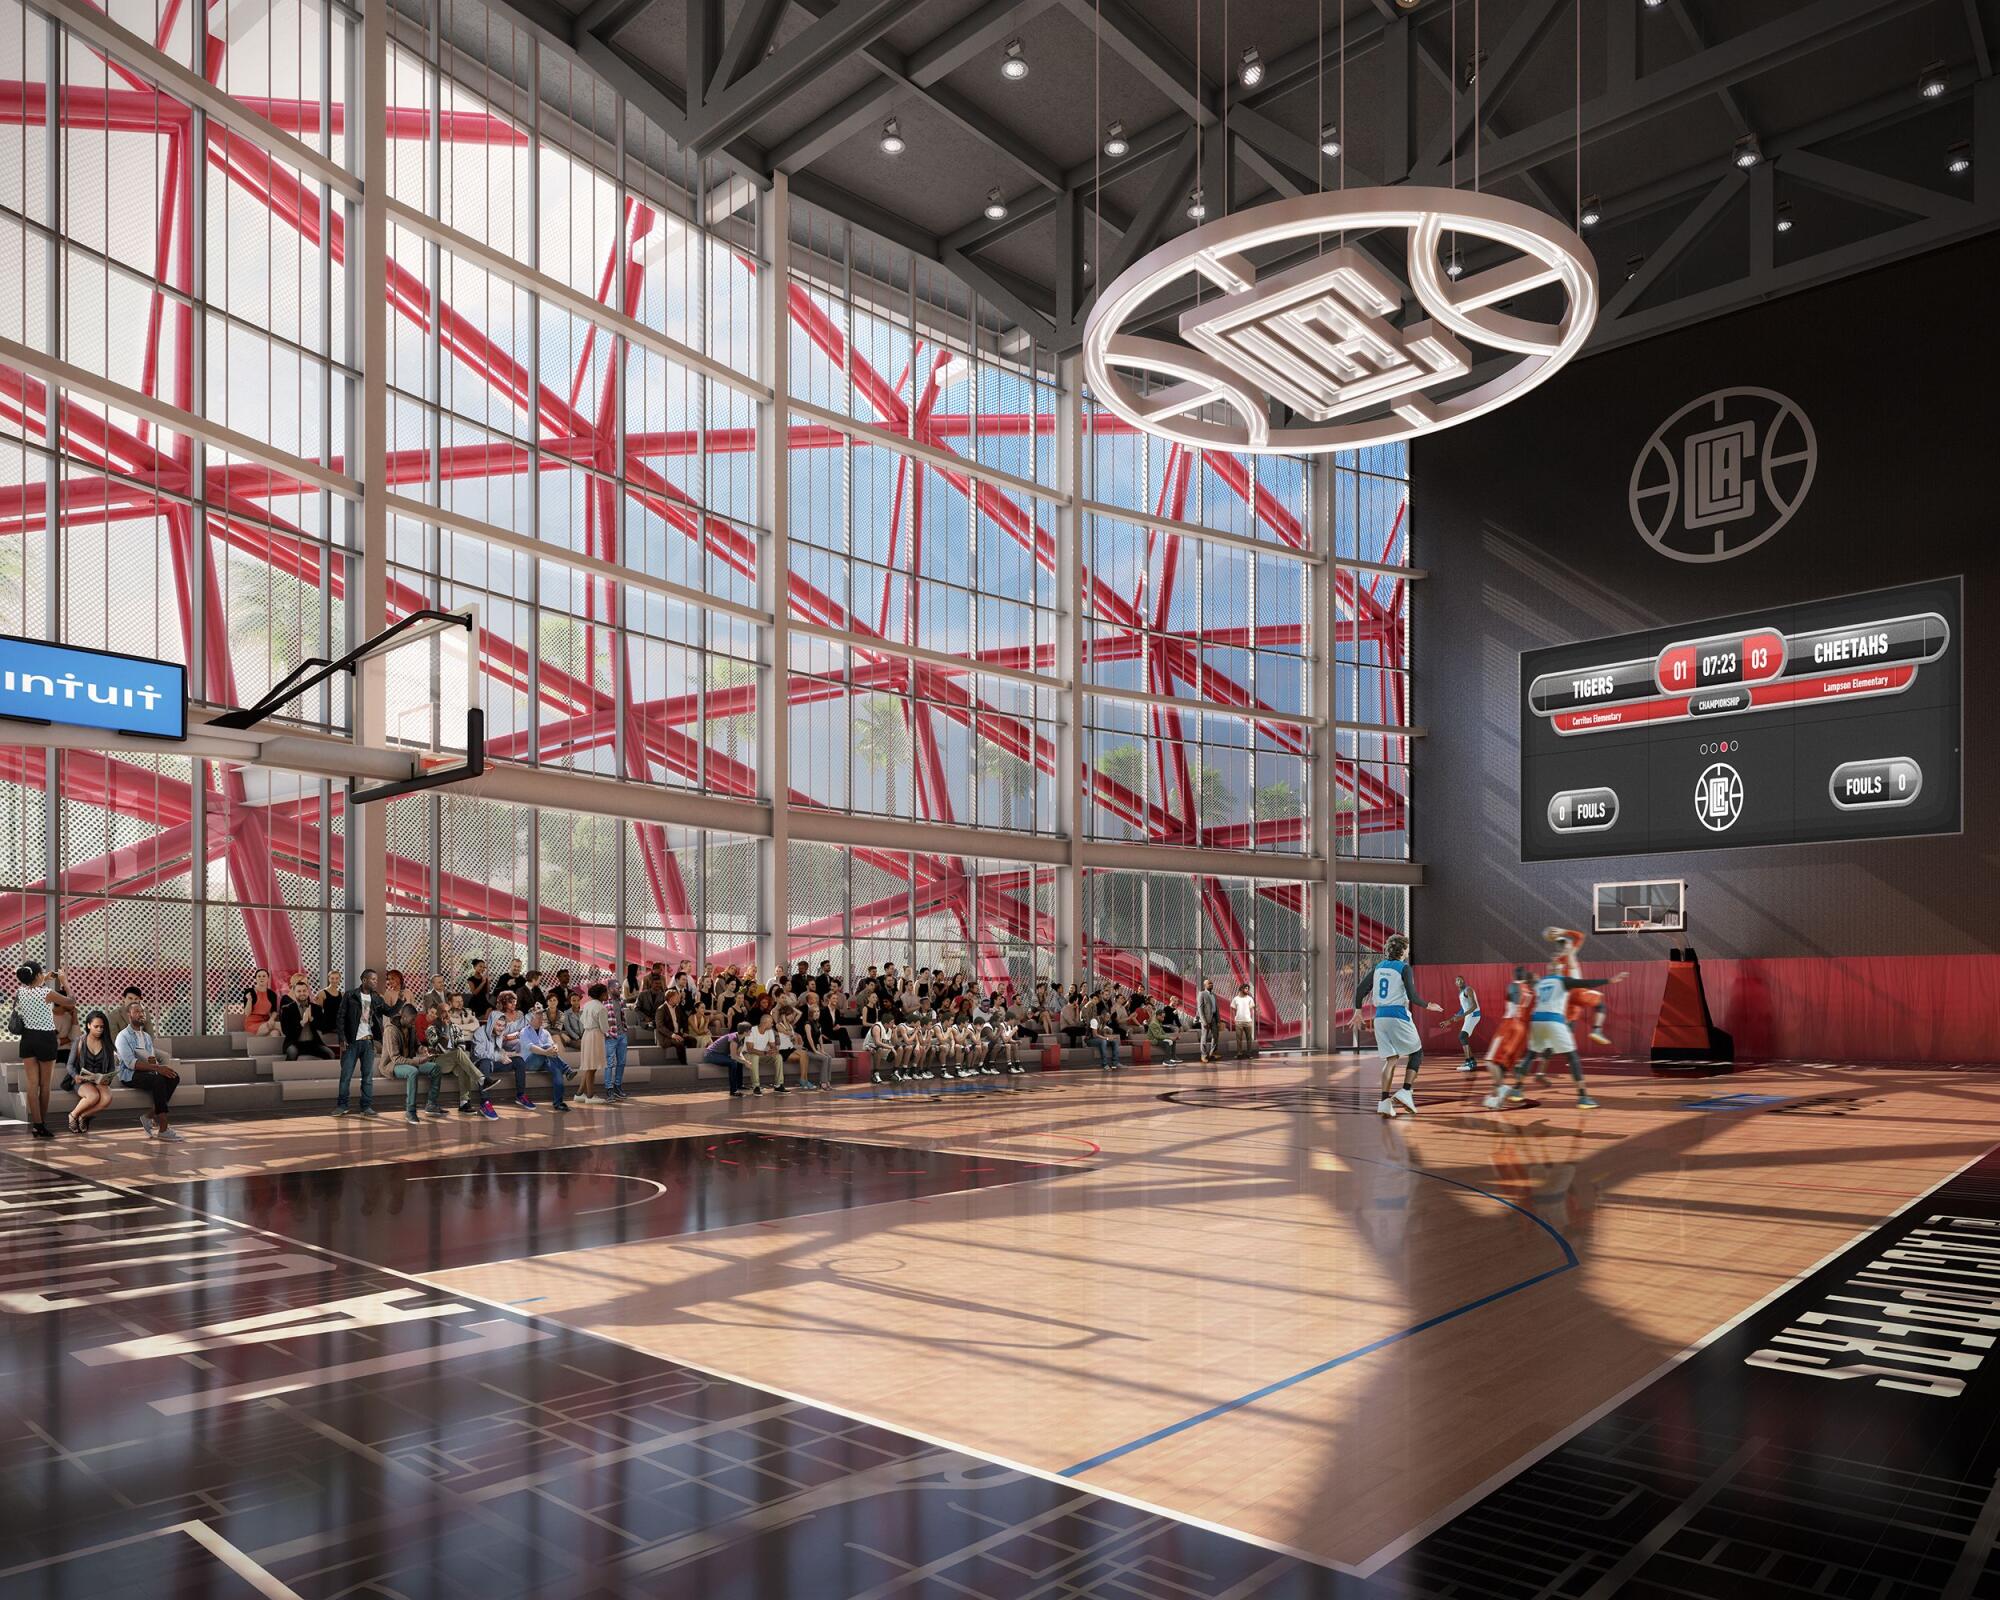 Inside the Clippers' new arena will be a basketball court where the team envisions hosting community events or AAU games.